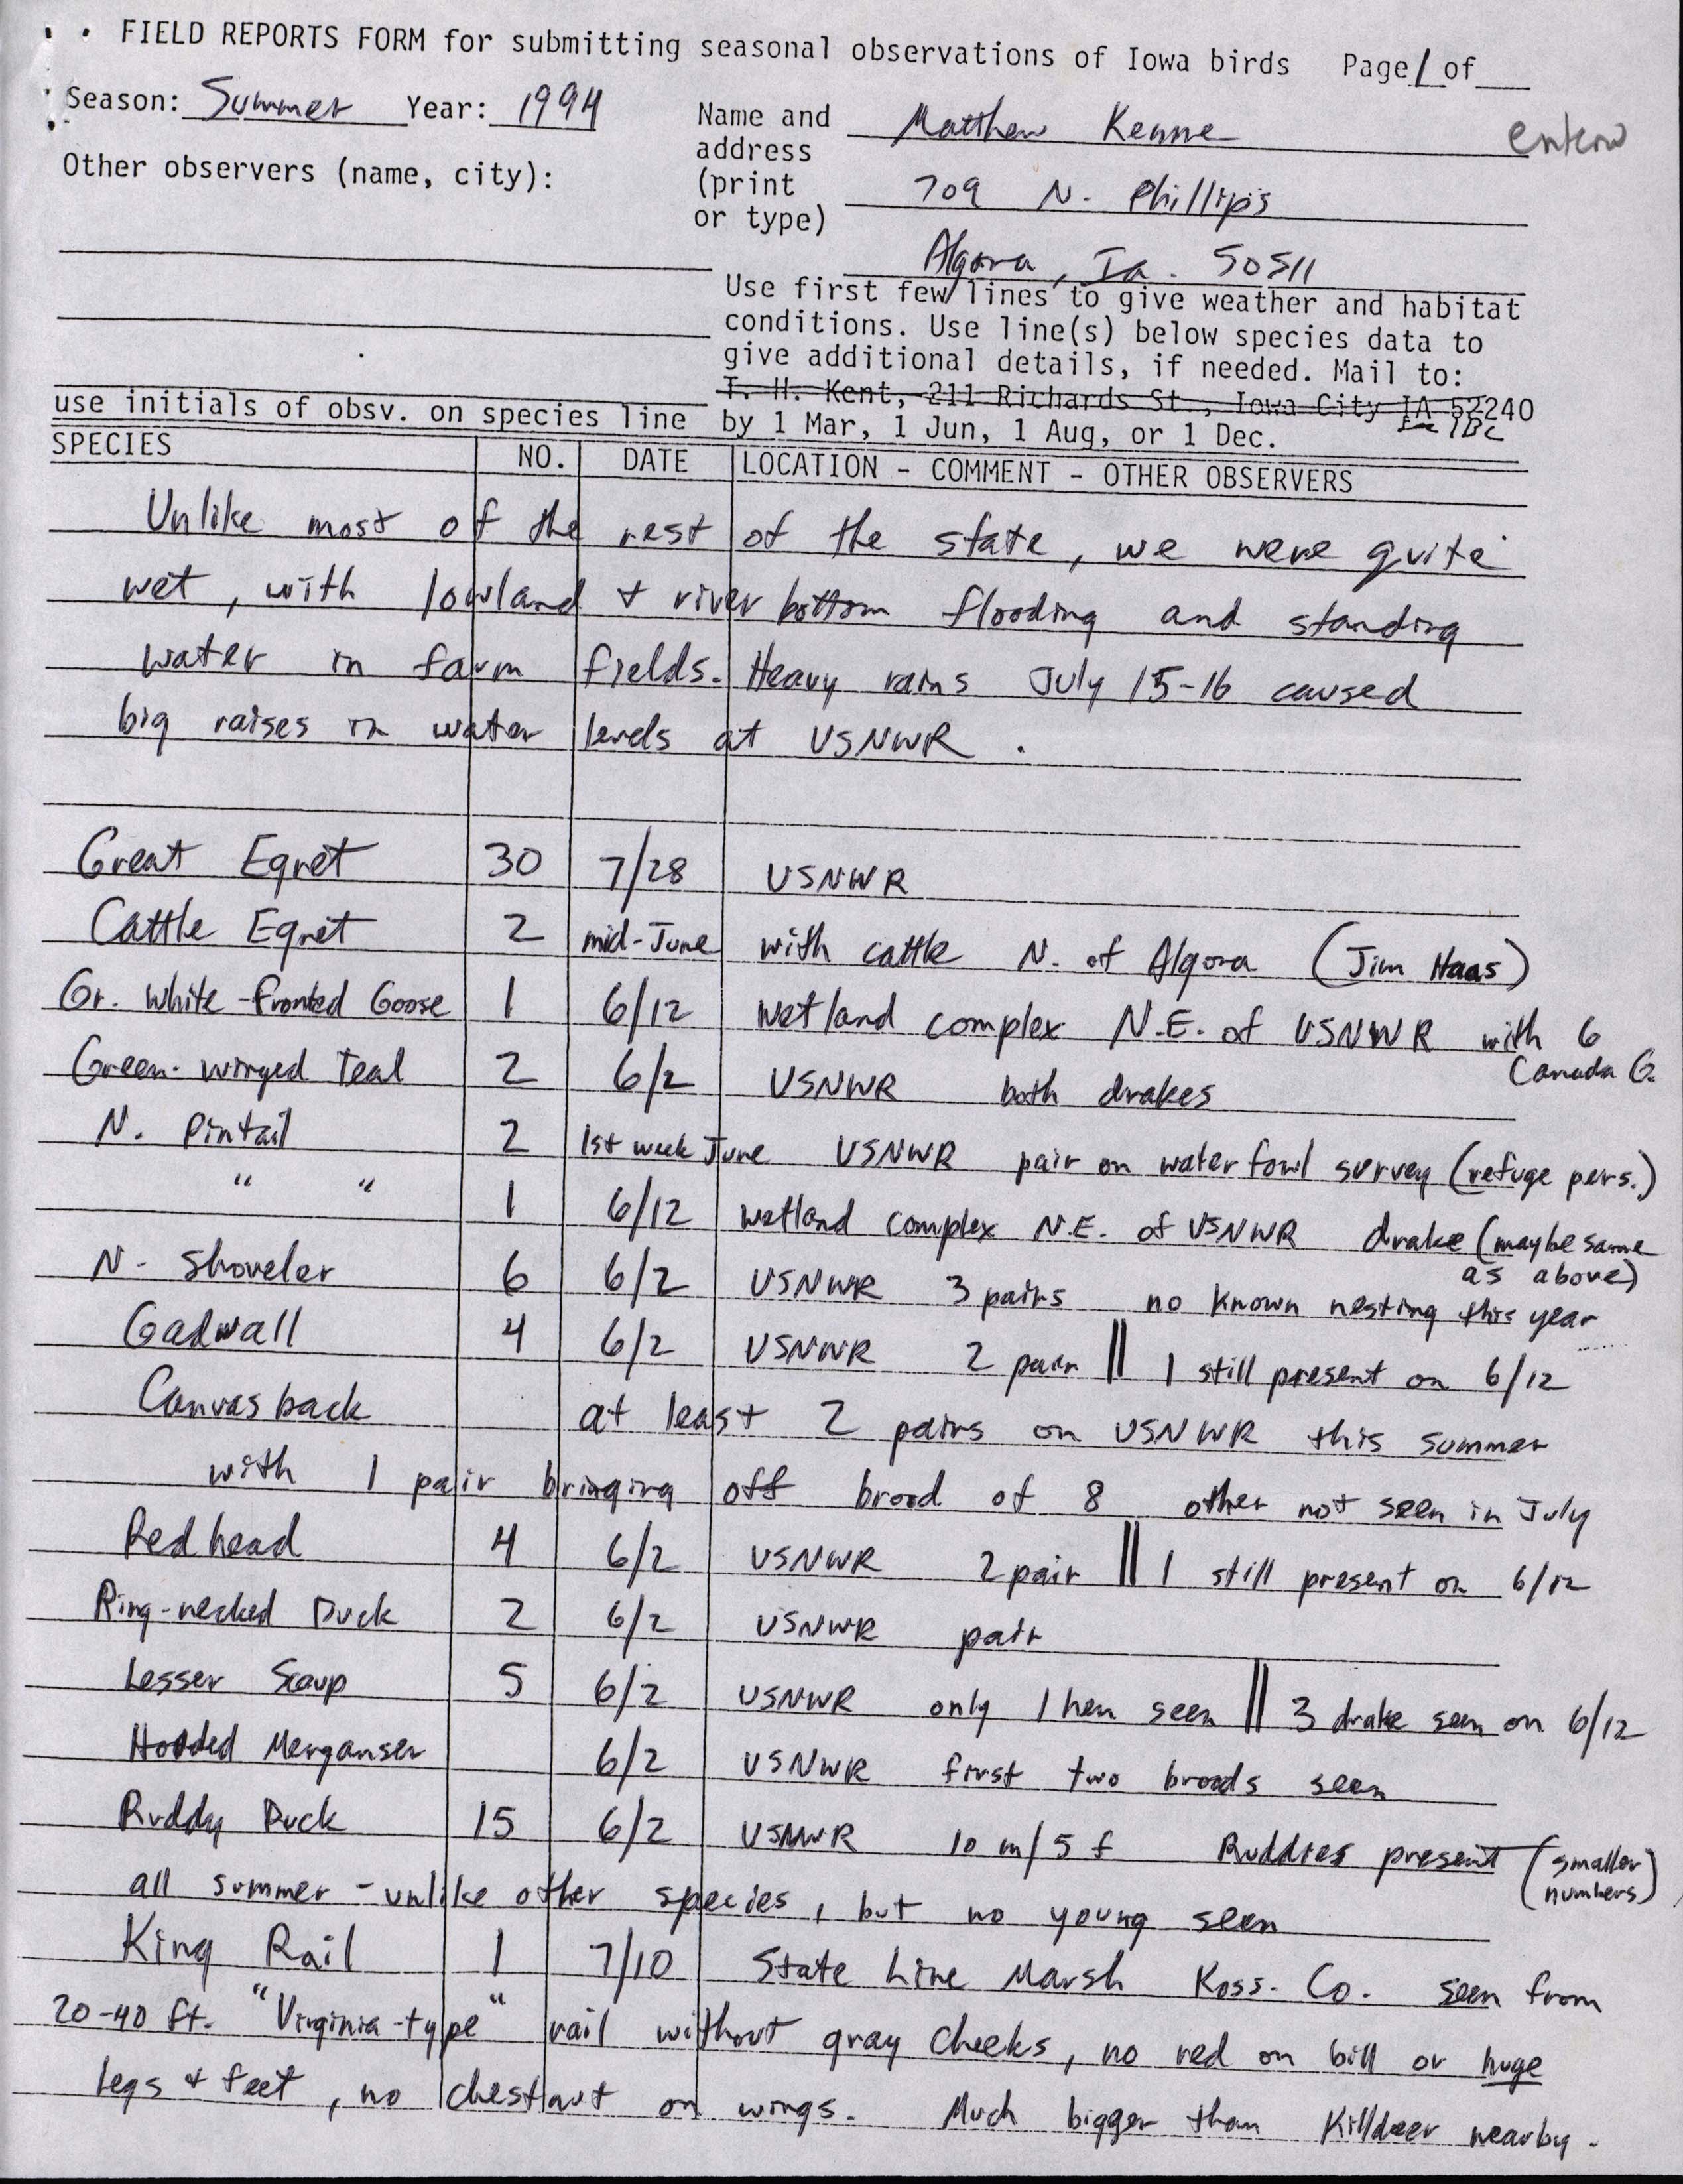 Field reports form for submitting seasonal observations of Iowa birds, Matthew Kenne, Summer 1994